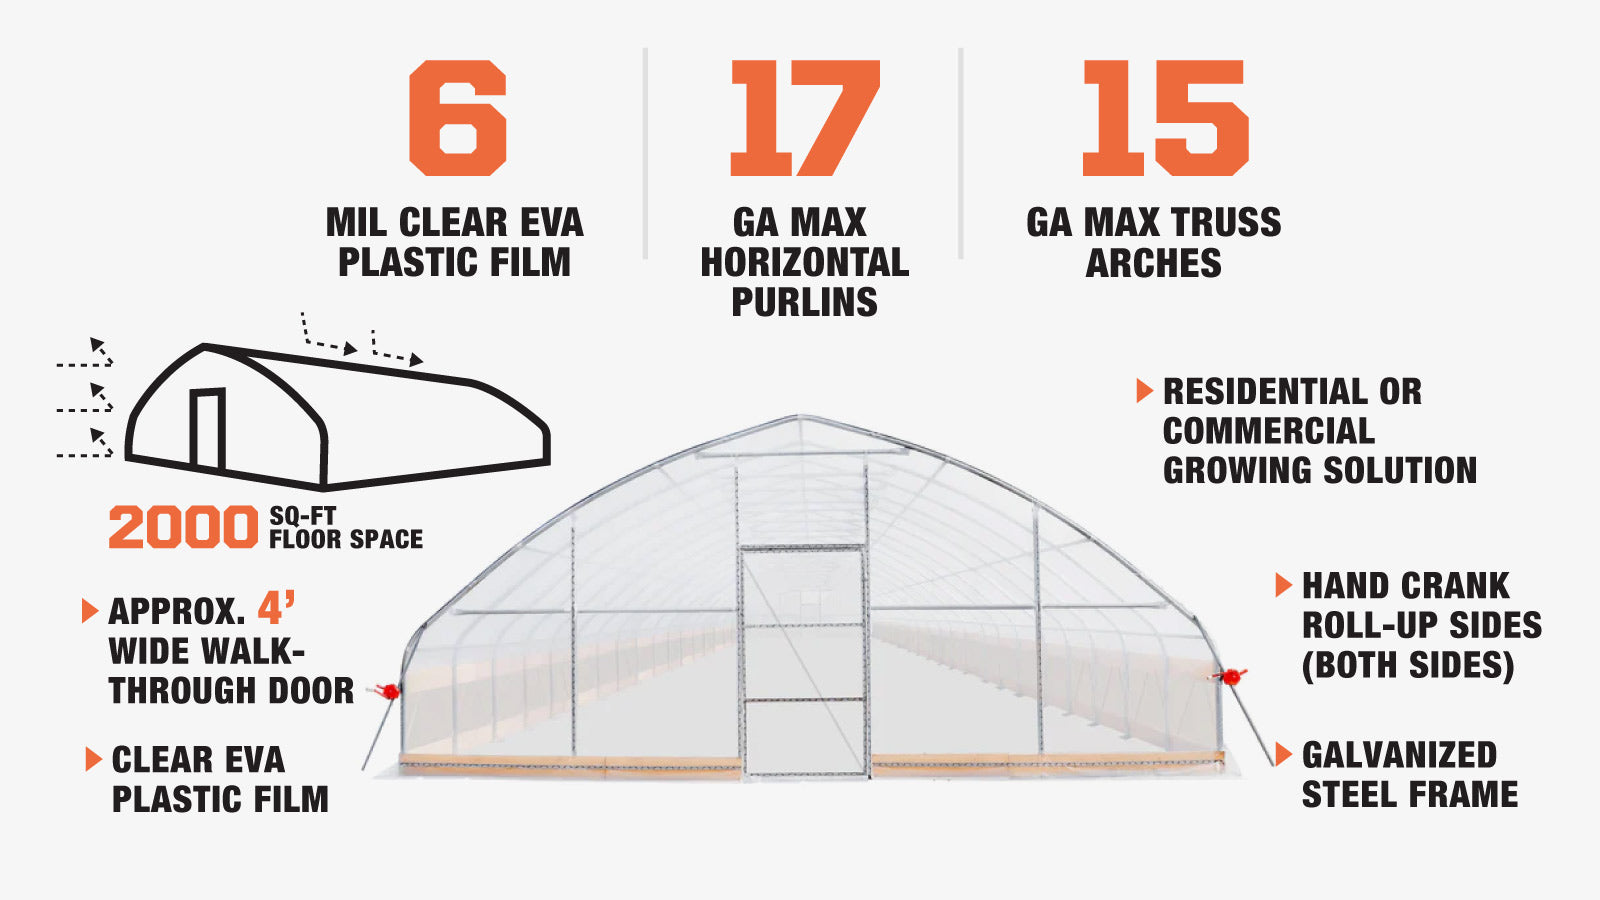 TMG Industrial 25’ x 80’ Tunnel Greenhouse Grow Tent w/6 Mil Clear EVA Plastic Film, Cold Frame, Hand Crank Roll-Up Sides, Peak Ceiling Roof, TMG-GH2580-description-image